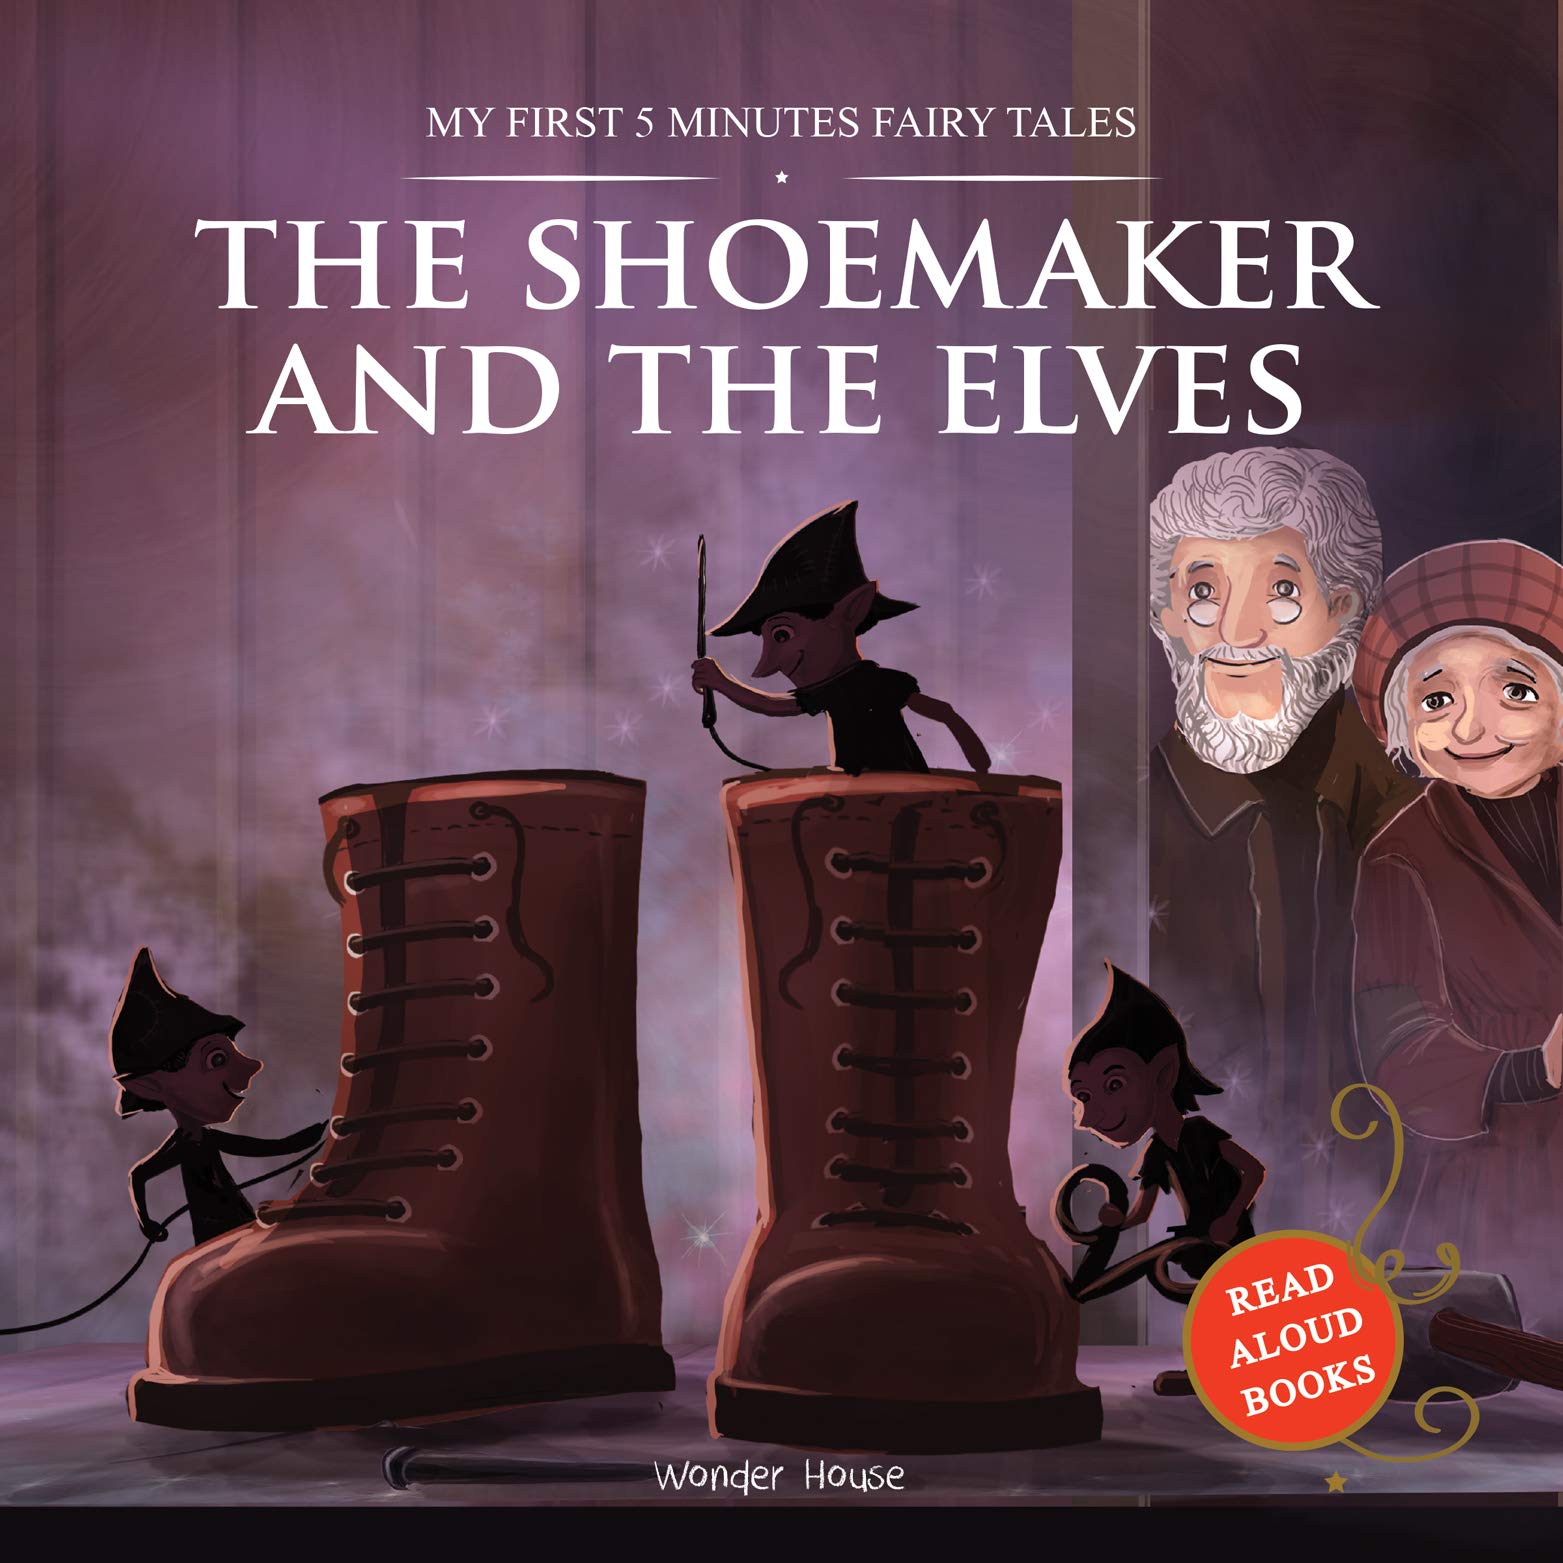 My First 5 Minutes Fairy Tales The Shoemaker and the Elves